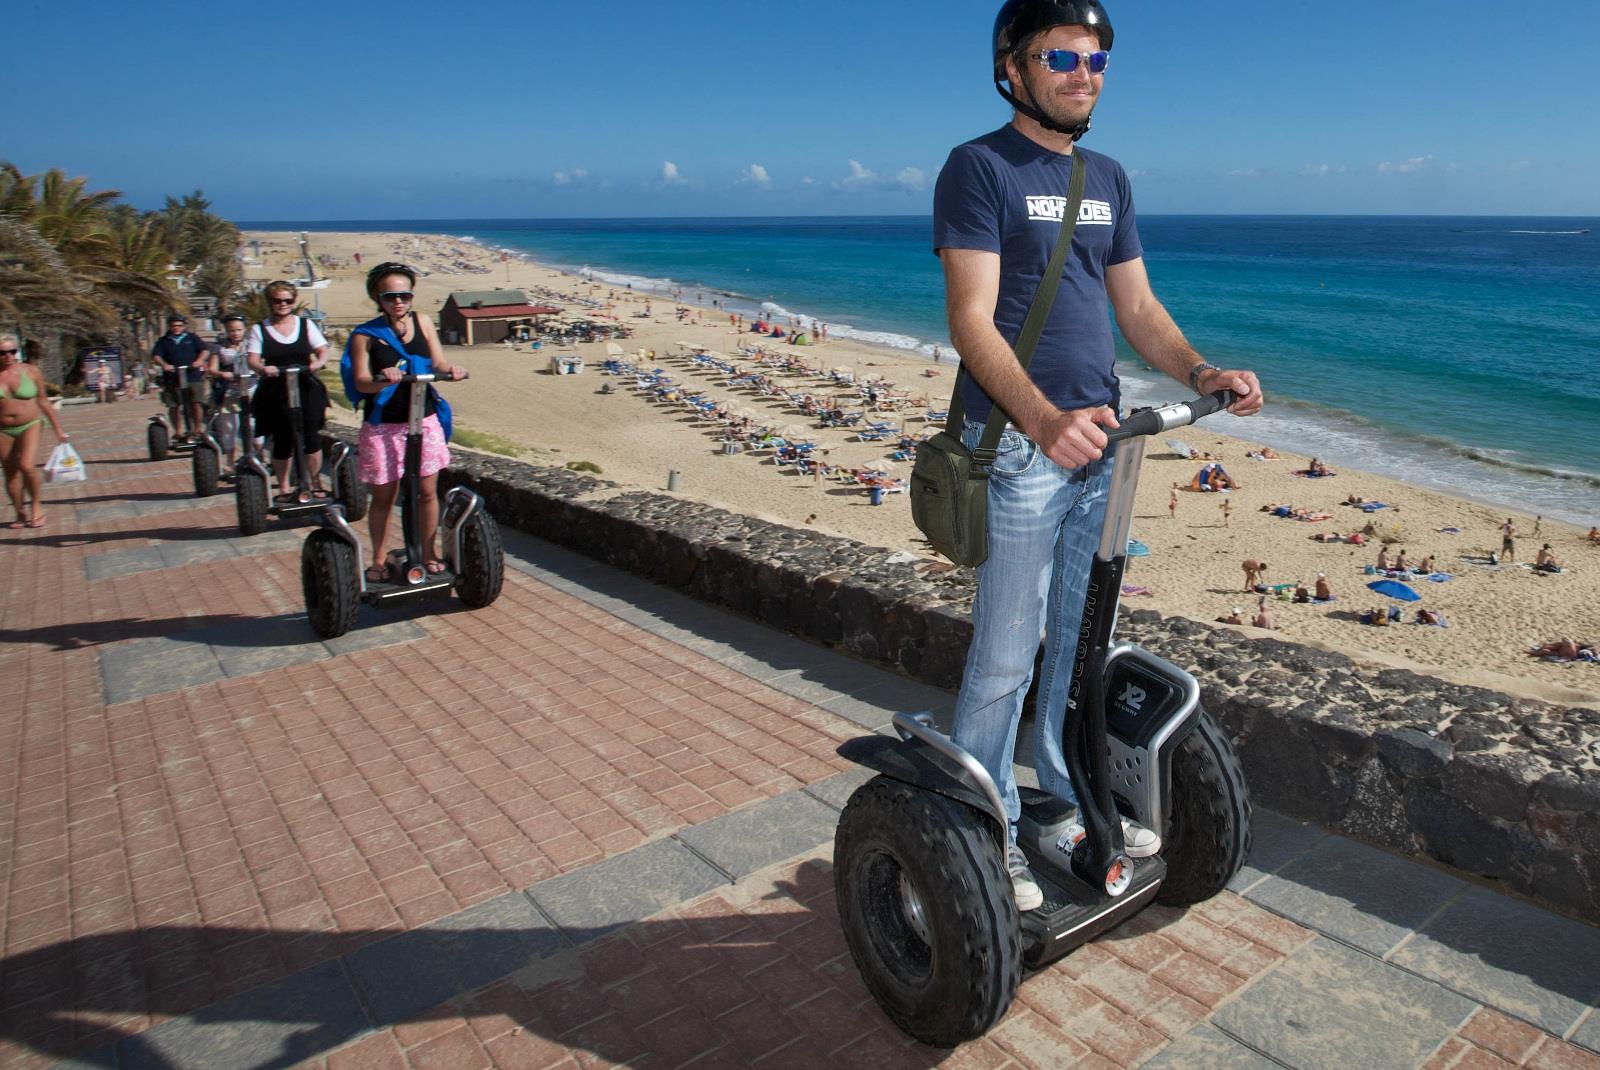 Segway-Tour-from-Playa-de-Jandia-to-Morro-Jable-6